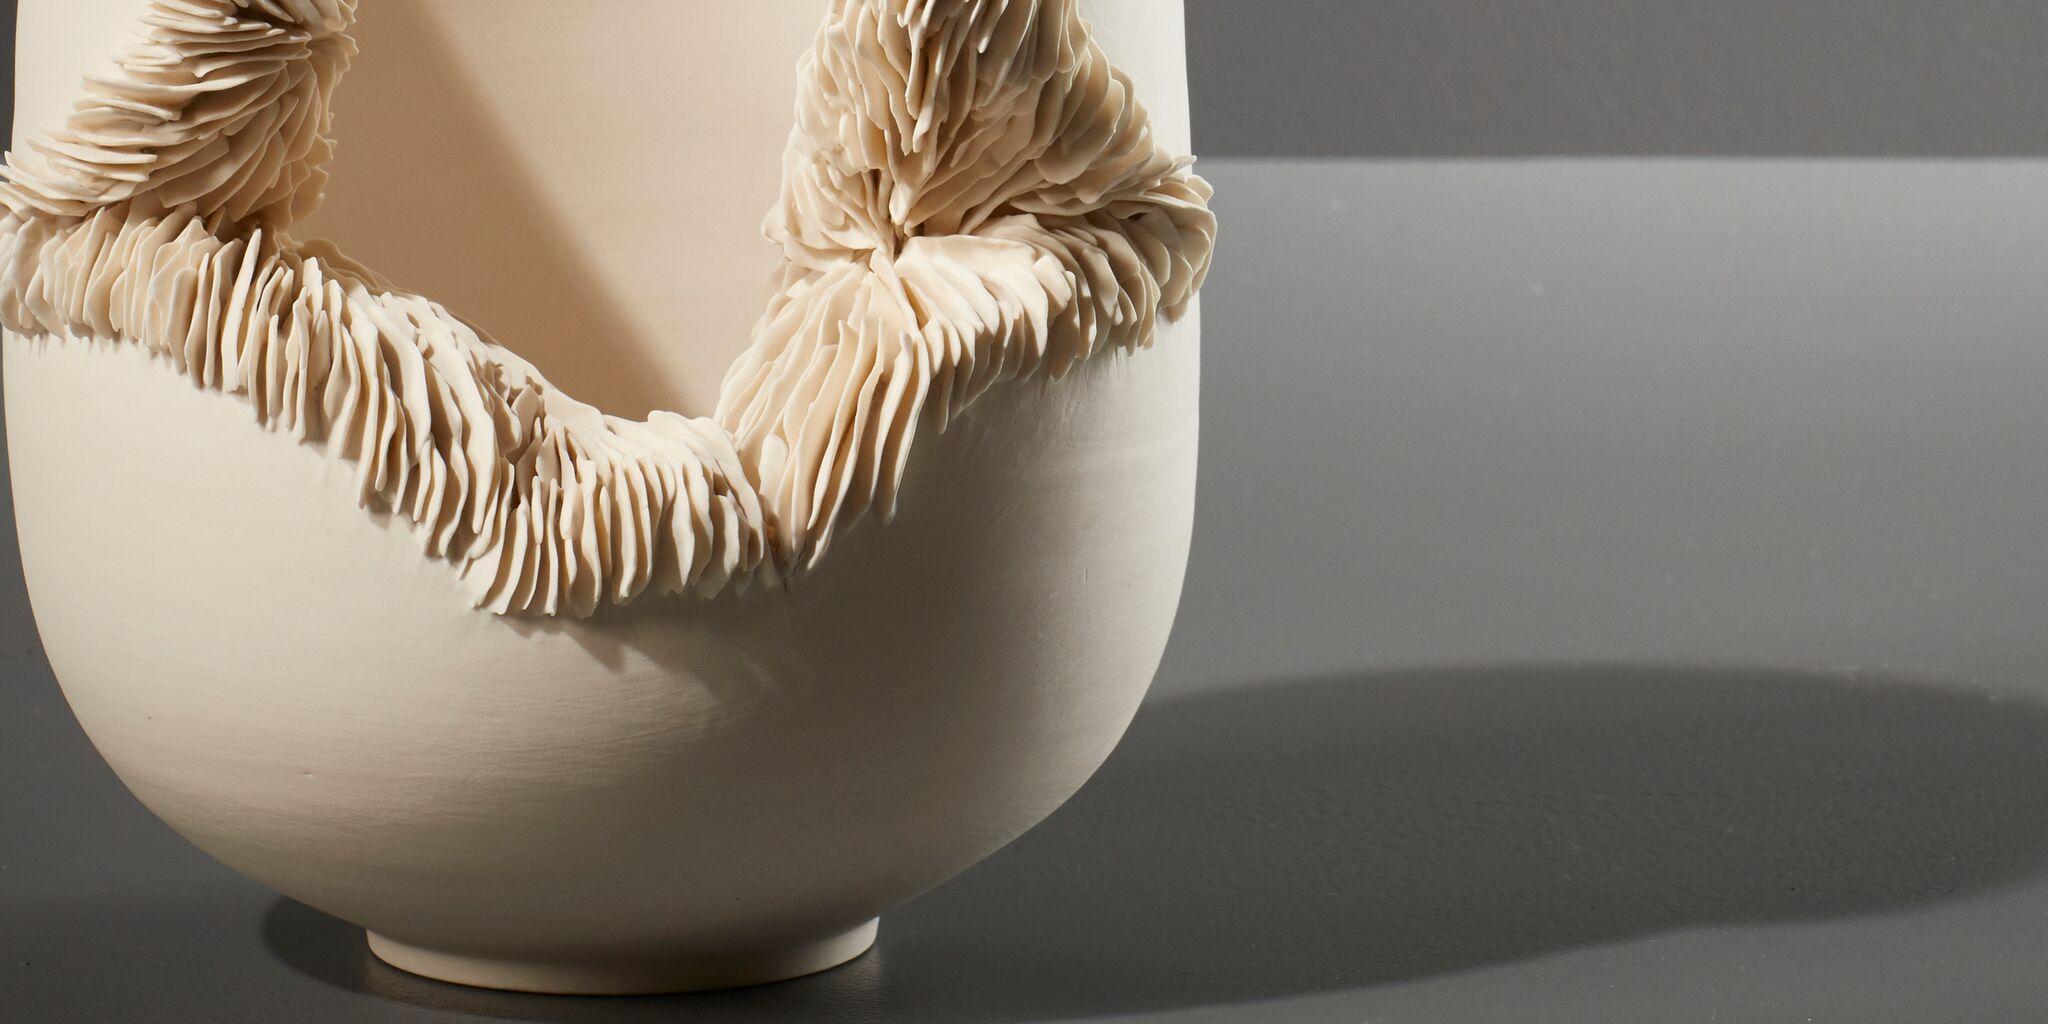 Crafting precise forms to resemble organisms, these unique bowls harmoniously combine the man-made with nature. Using porcelain for its inherent qualities of purity and simplicity, Olivia covers her precise, wheel thrown pieces in hand built